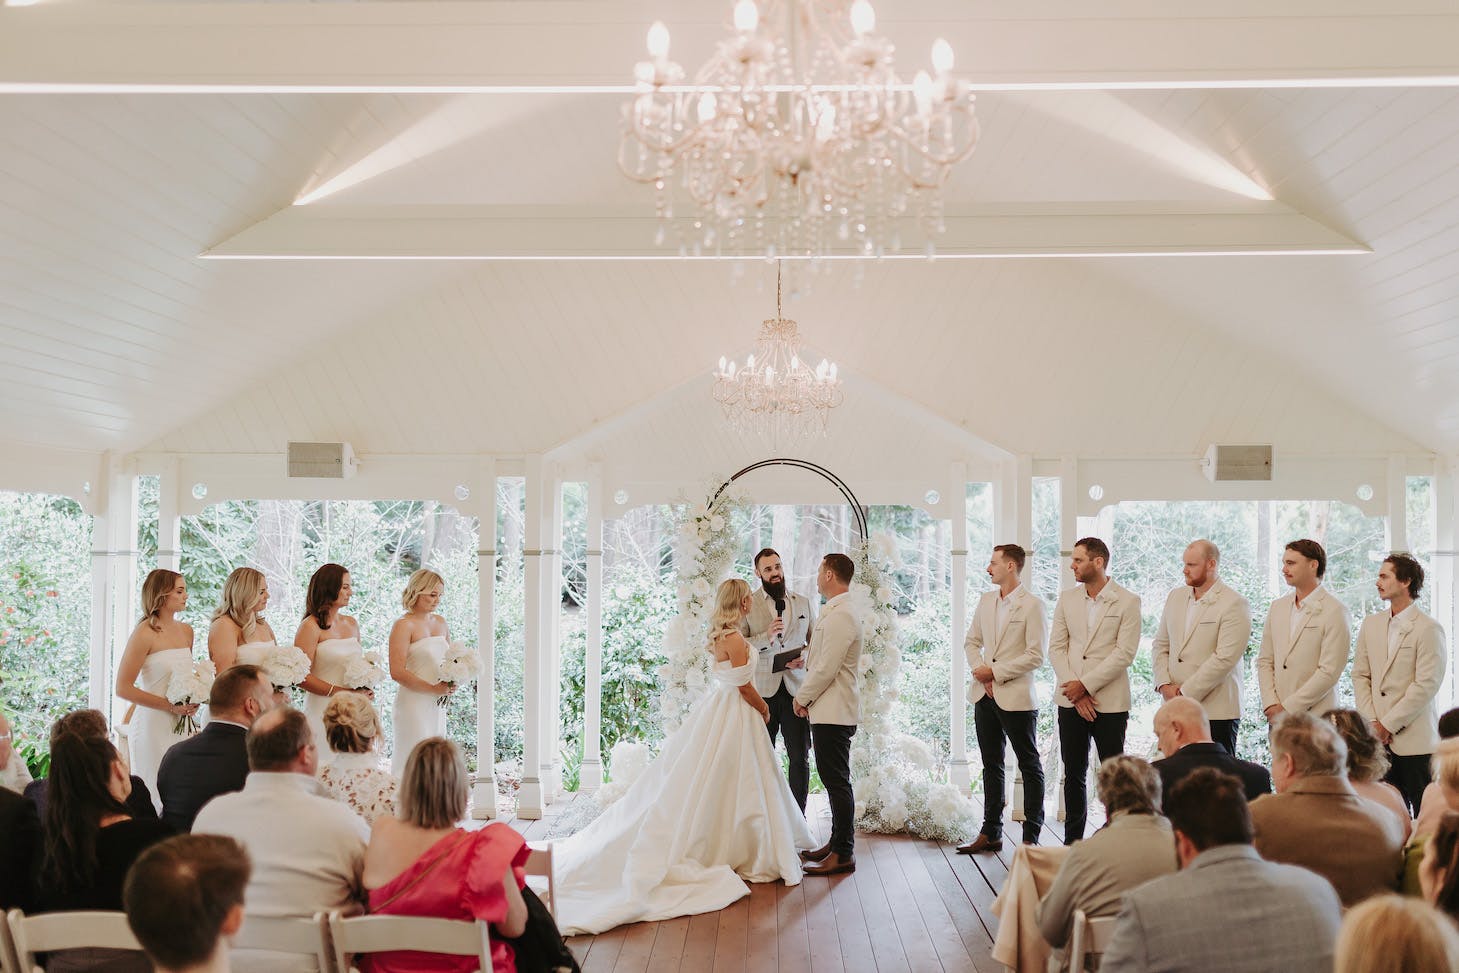 A wedding ceremony takes place in a charming, well-lit venue. The bride and groom stand at the altar with their wedding party lined up on either side. Guests are seated and watching the ceremony. Chandeliers hang from the ceiling, adding elegance to the setting.